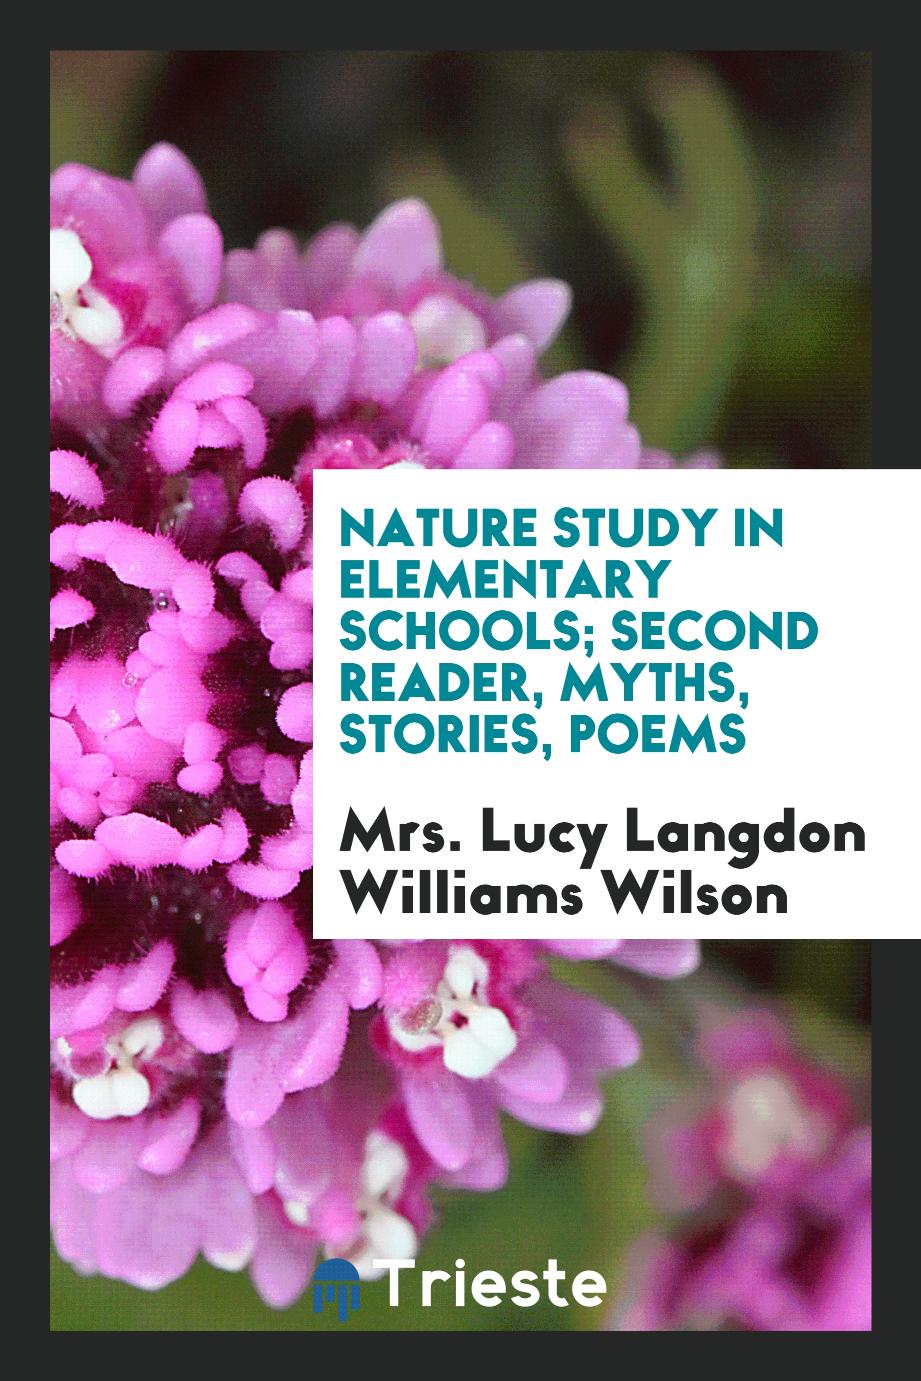 Nature study in elementary schools; second reader, myths, stories, poems